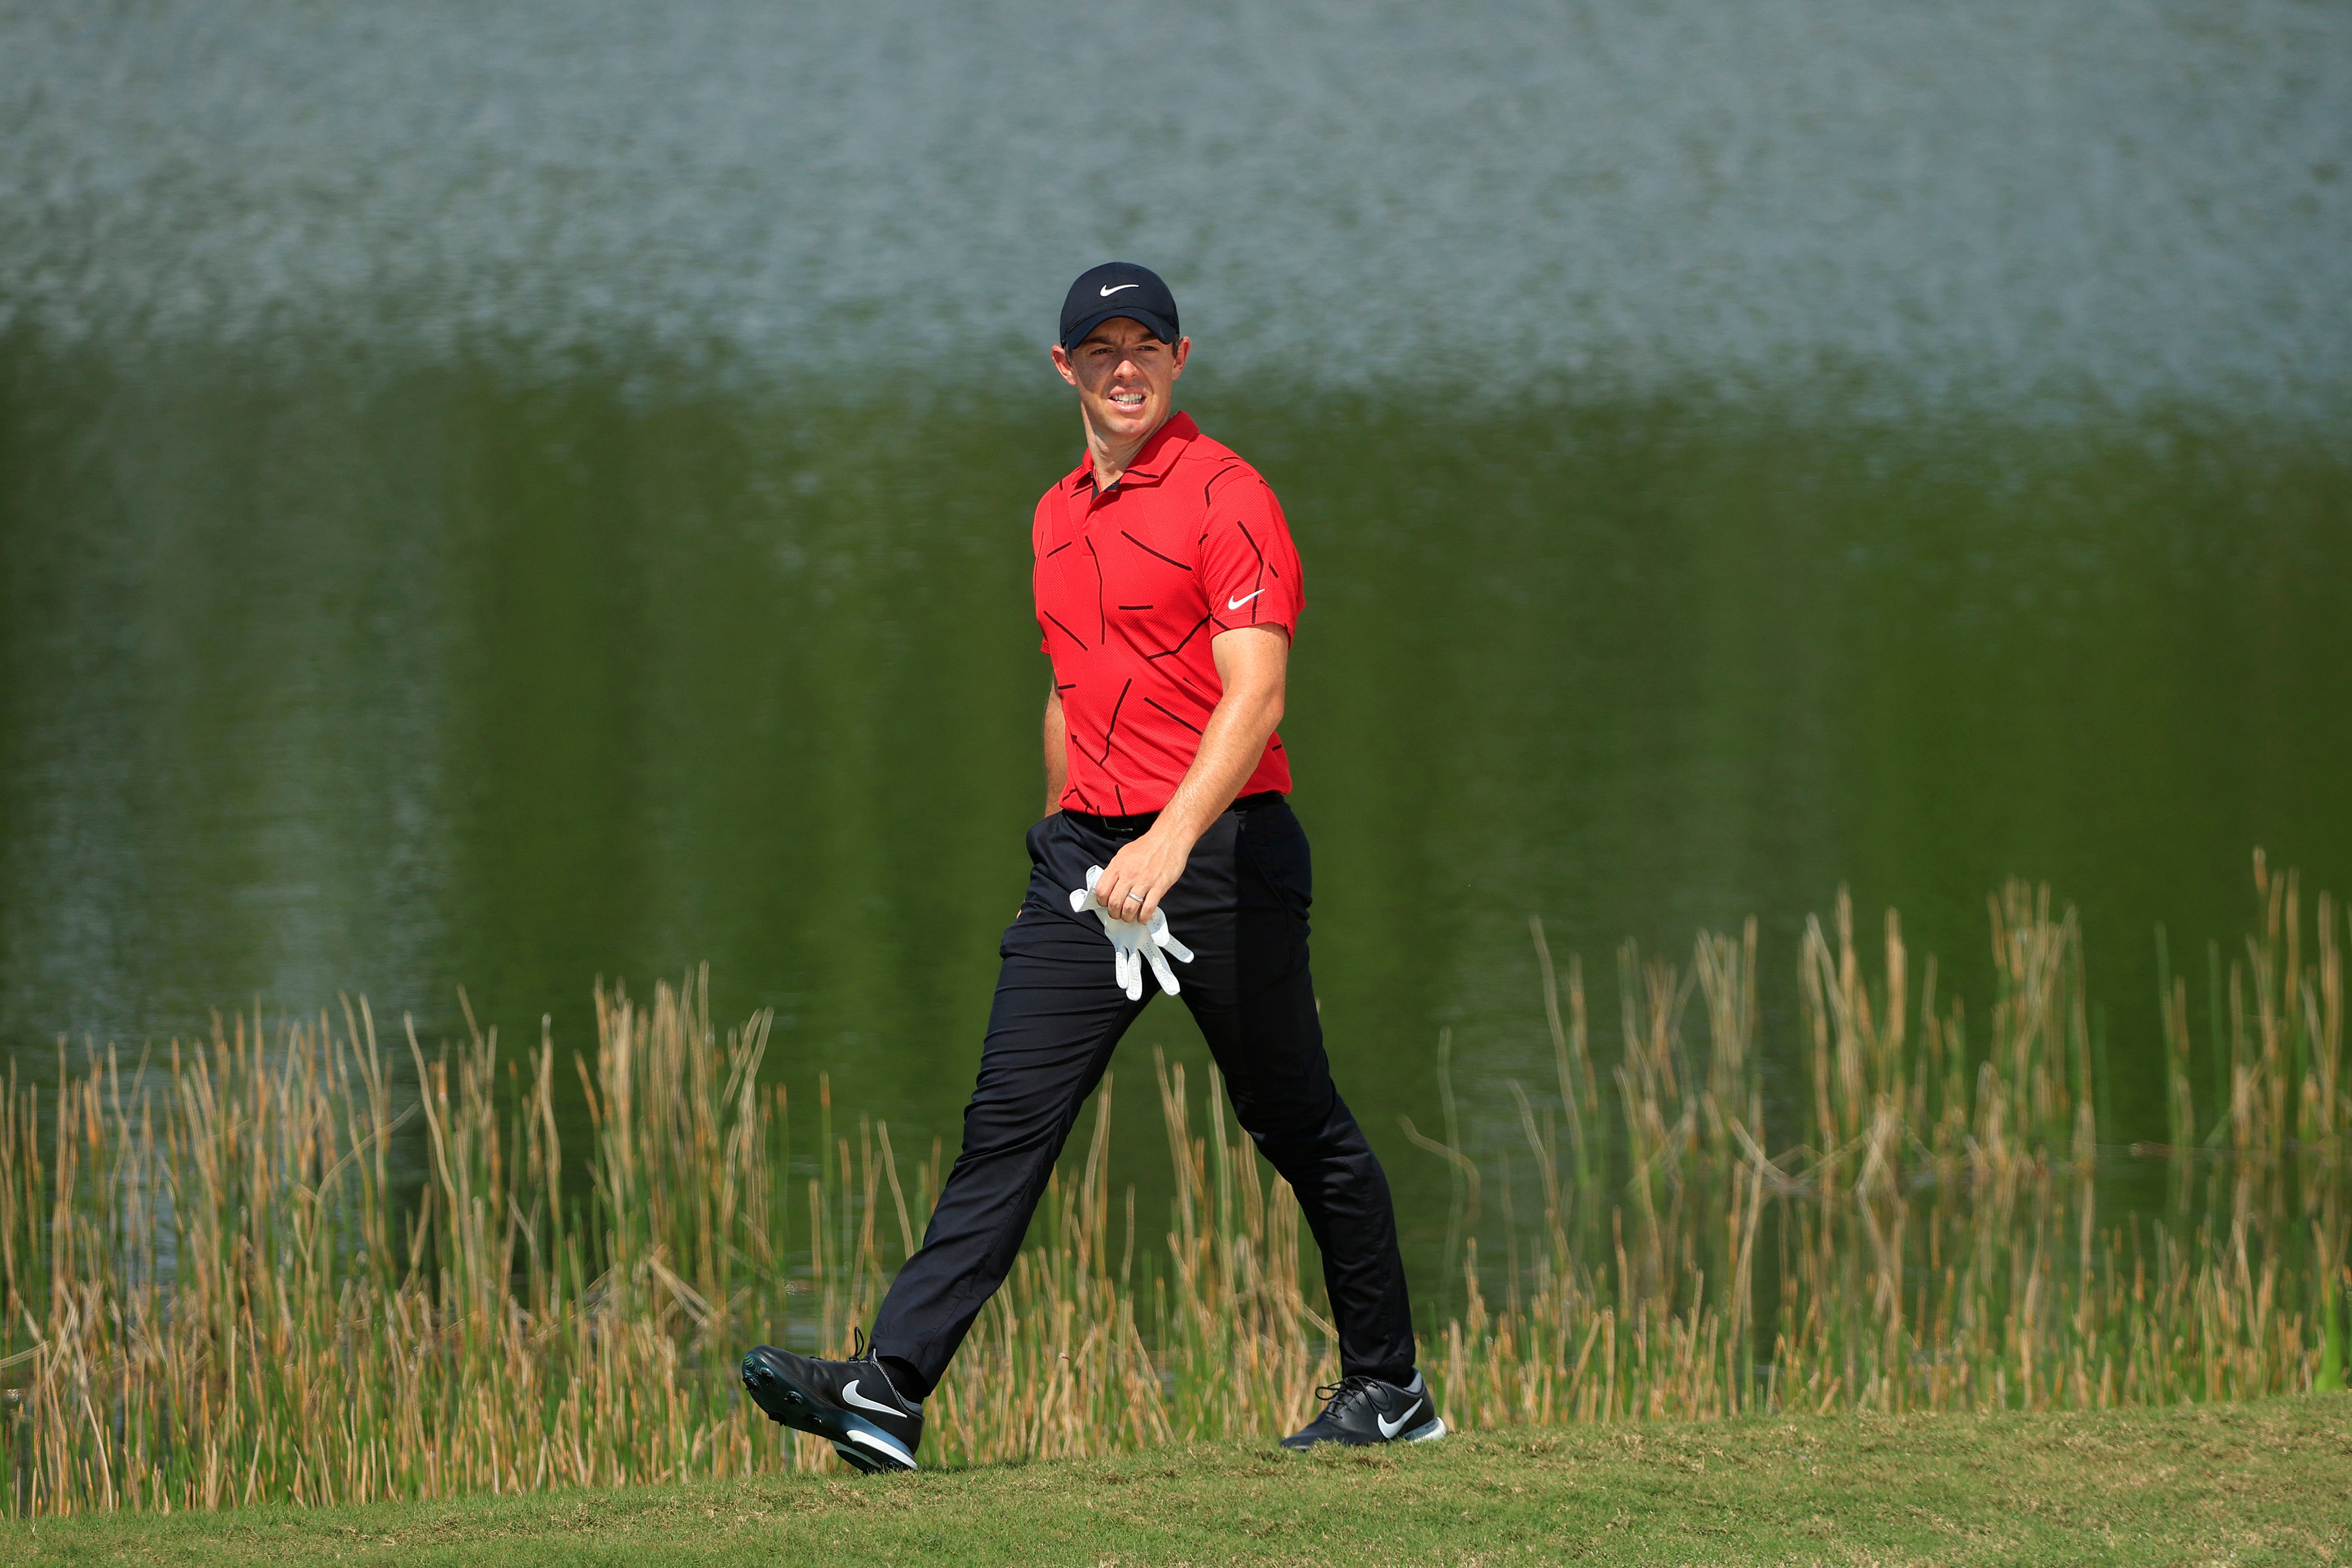 Rory McIlroy, playing the final round of the World Golf Championships-Workday Championship in Bradenton, Florida, was one of several golfers across all three major tours who wore Sunday red and black in honor of Tiger Woods, who was injured in a car accident Monday.